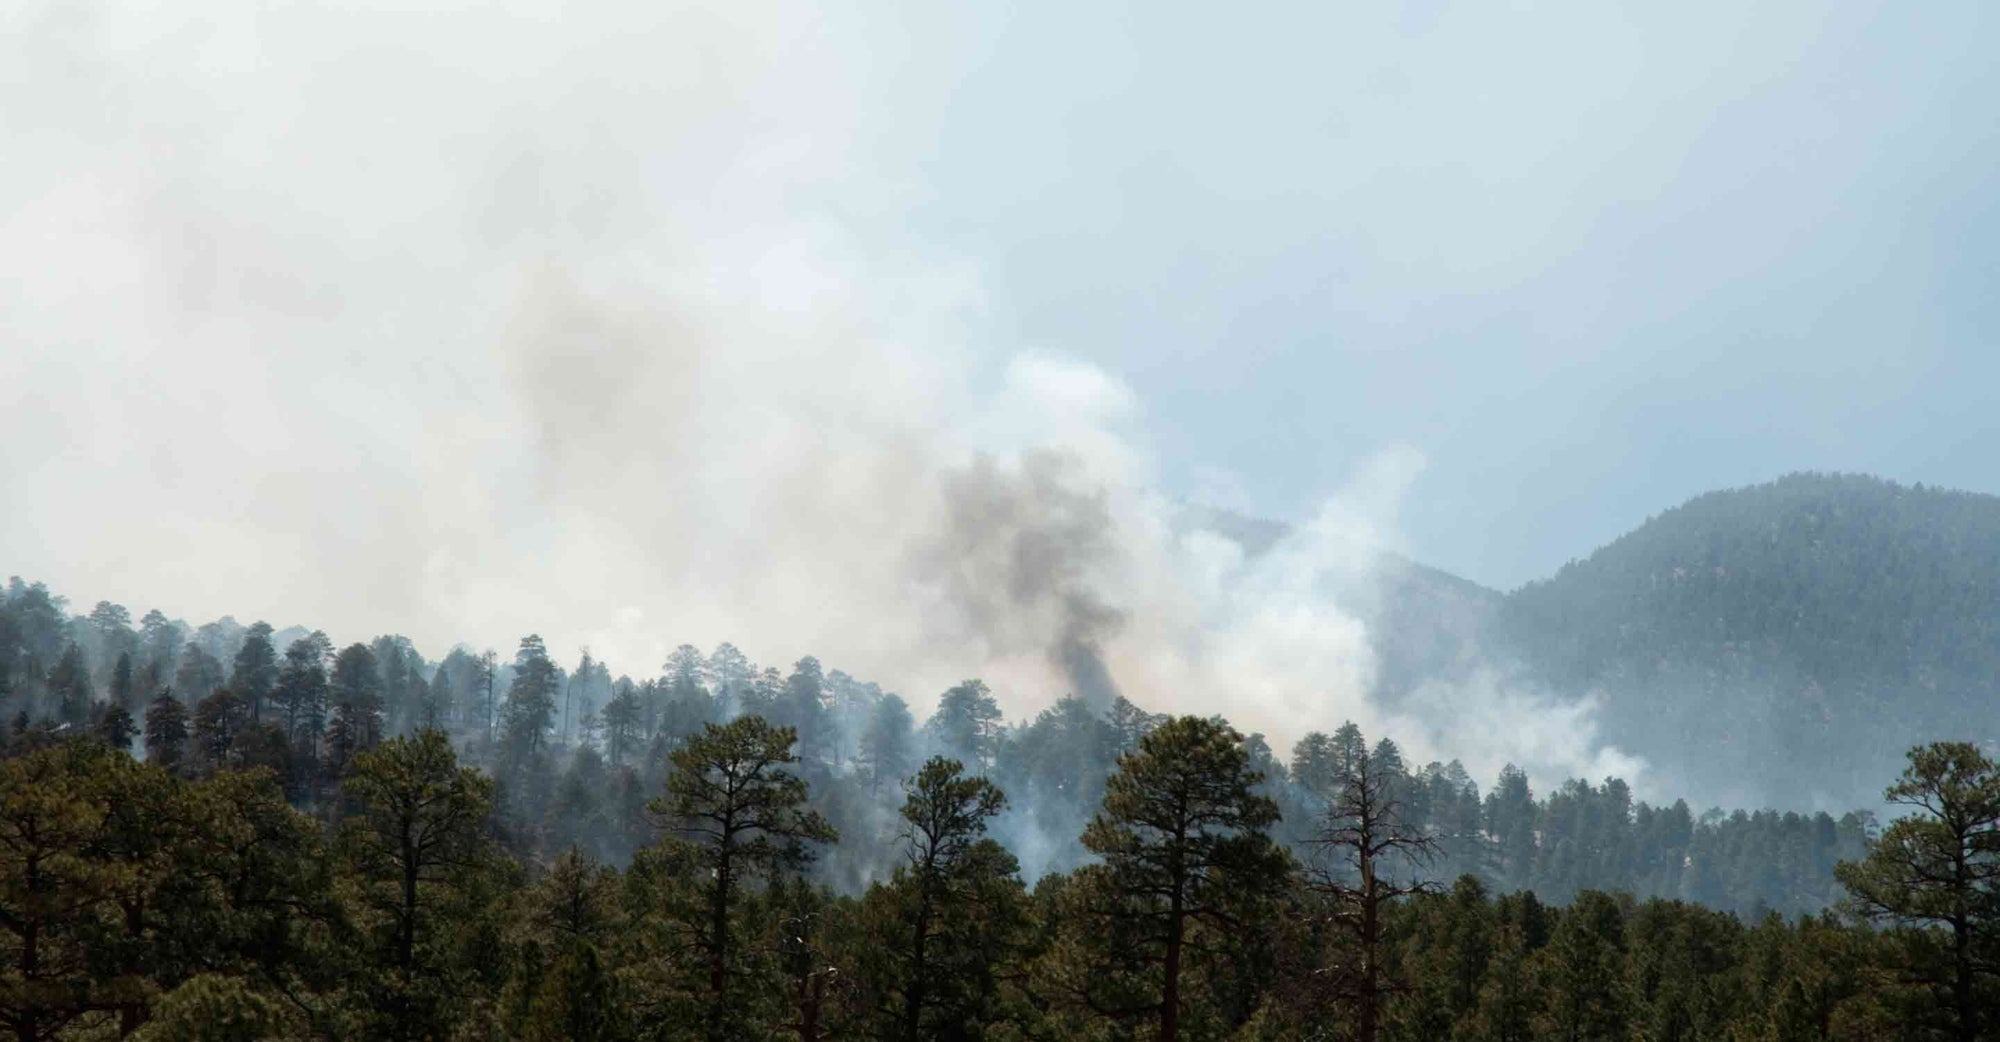 Arizona wildfires prompt warnings; Officials recommend air purifiers